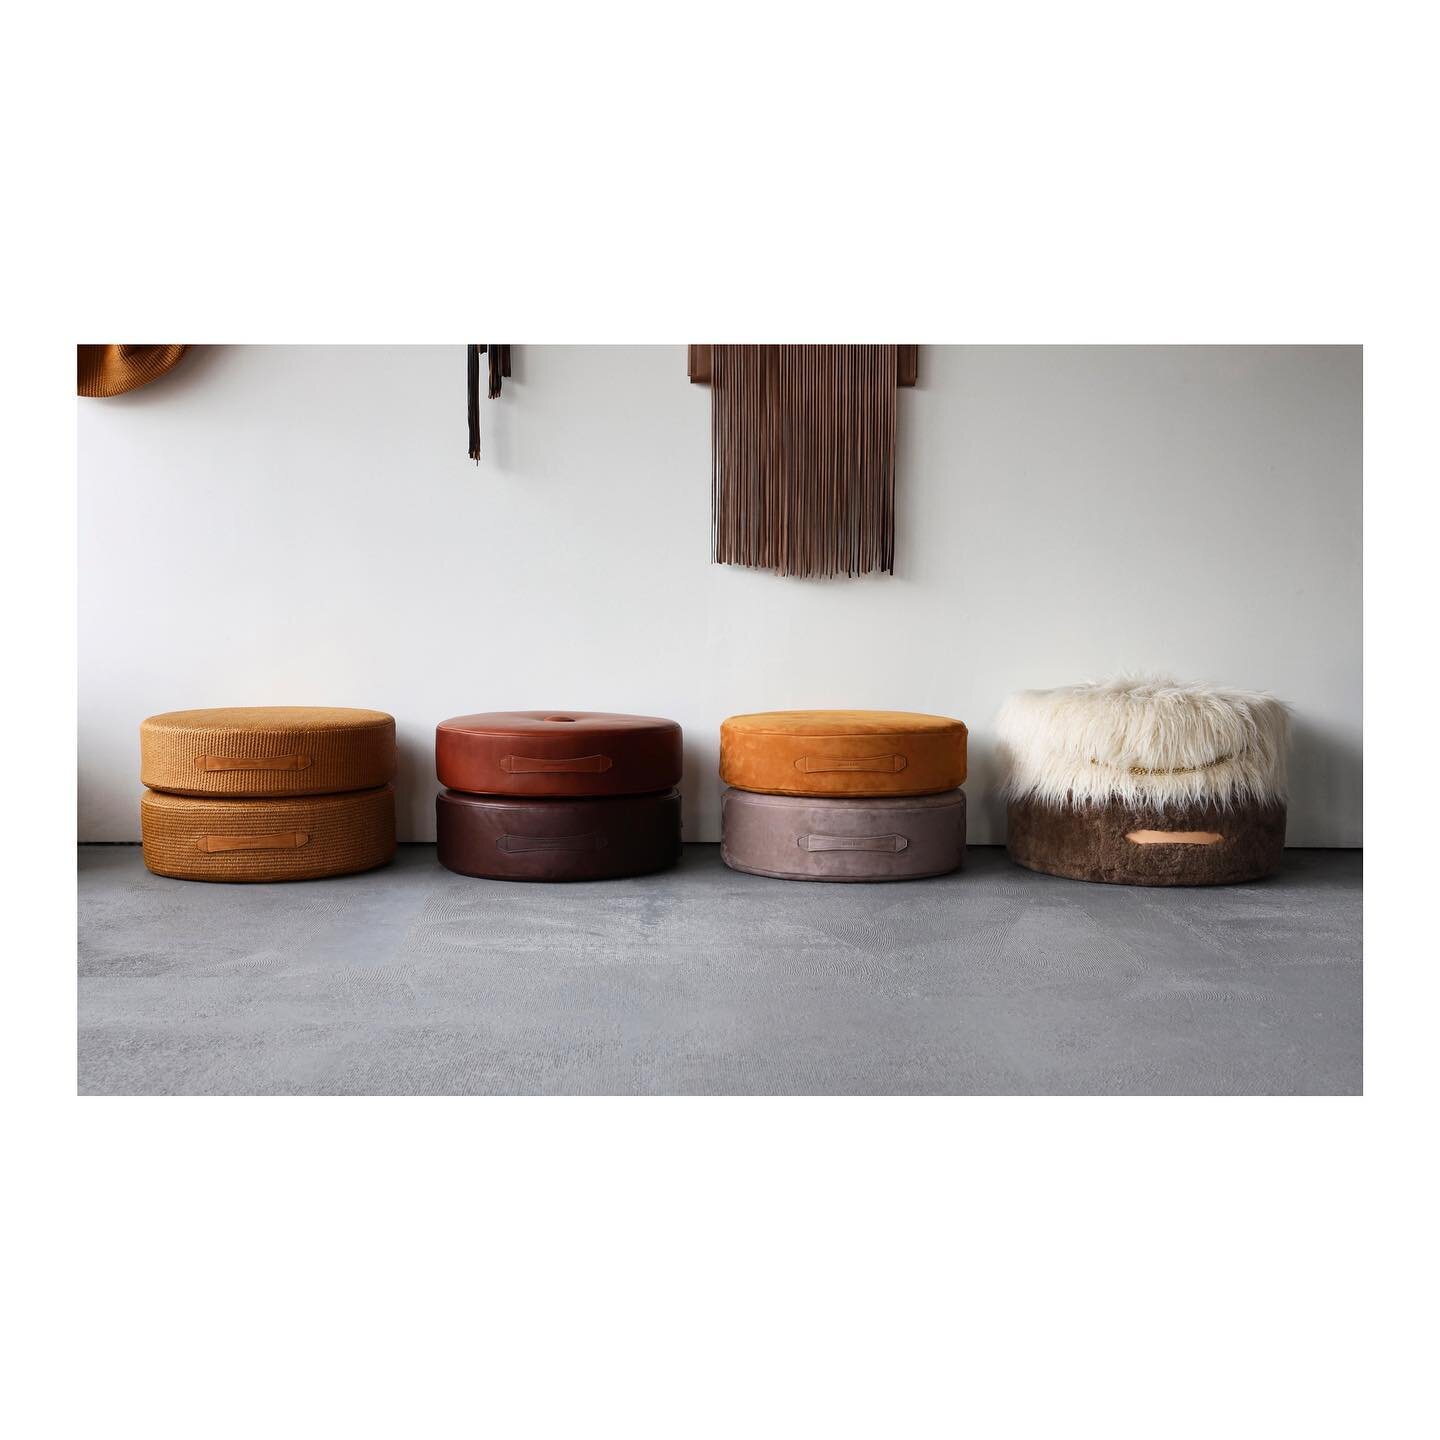 ✨Divine✨ pile-up collision of 20&rdquo; floor cushion active projects 

#mosesnadel #floorcushions #palette #instamood #swoonworthy #drumcushion #puckcushion #drumcushionx #stackingcushions #madetoorder #shearling #leather #nubuck #grasscloth #luxury